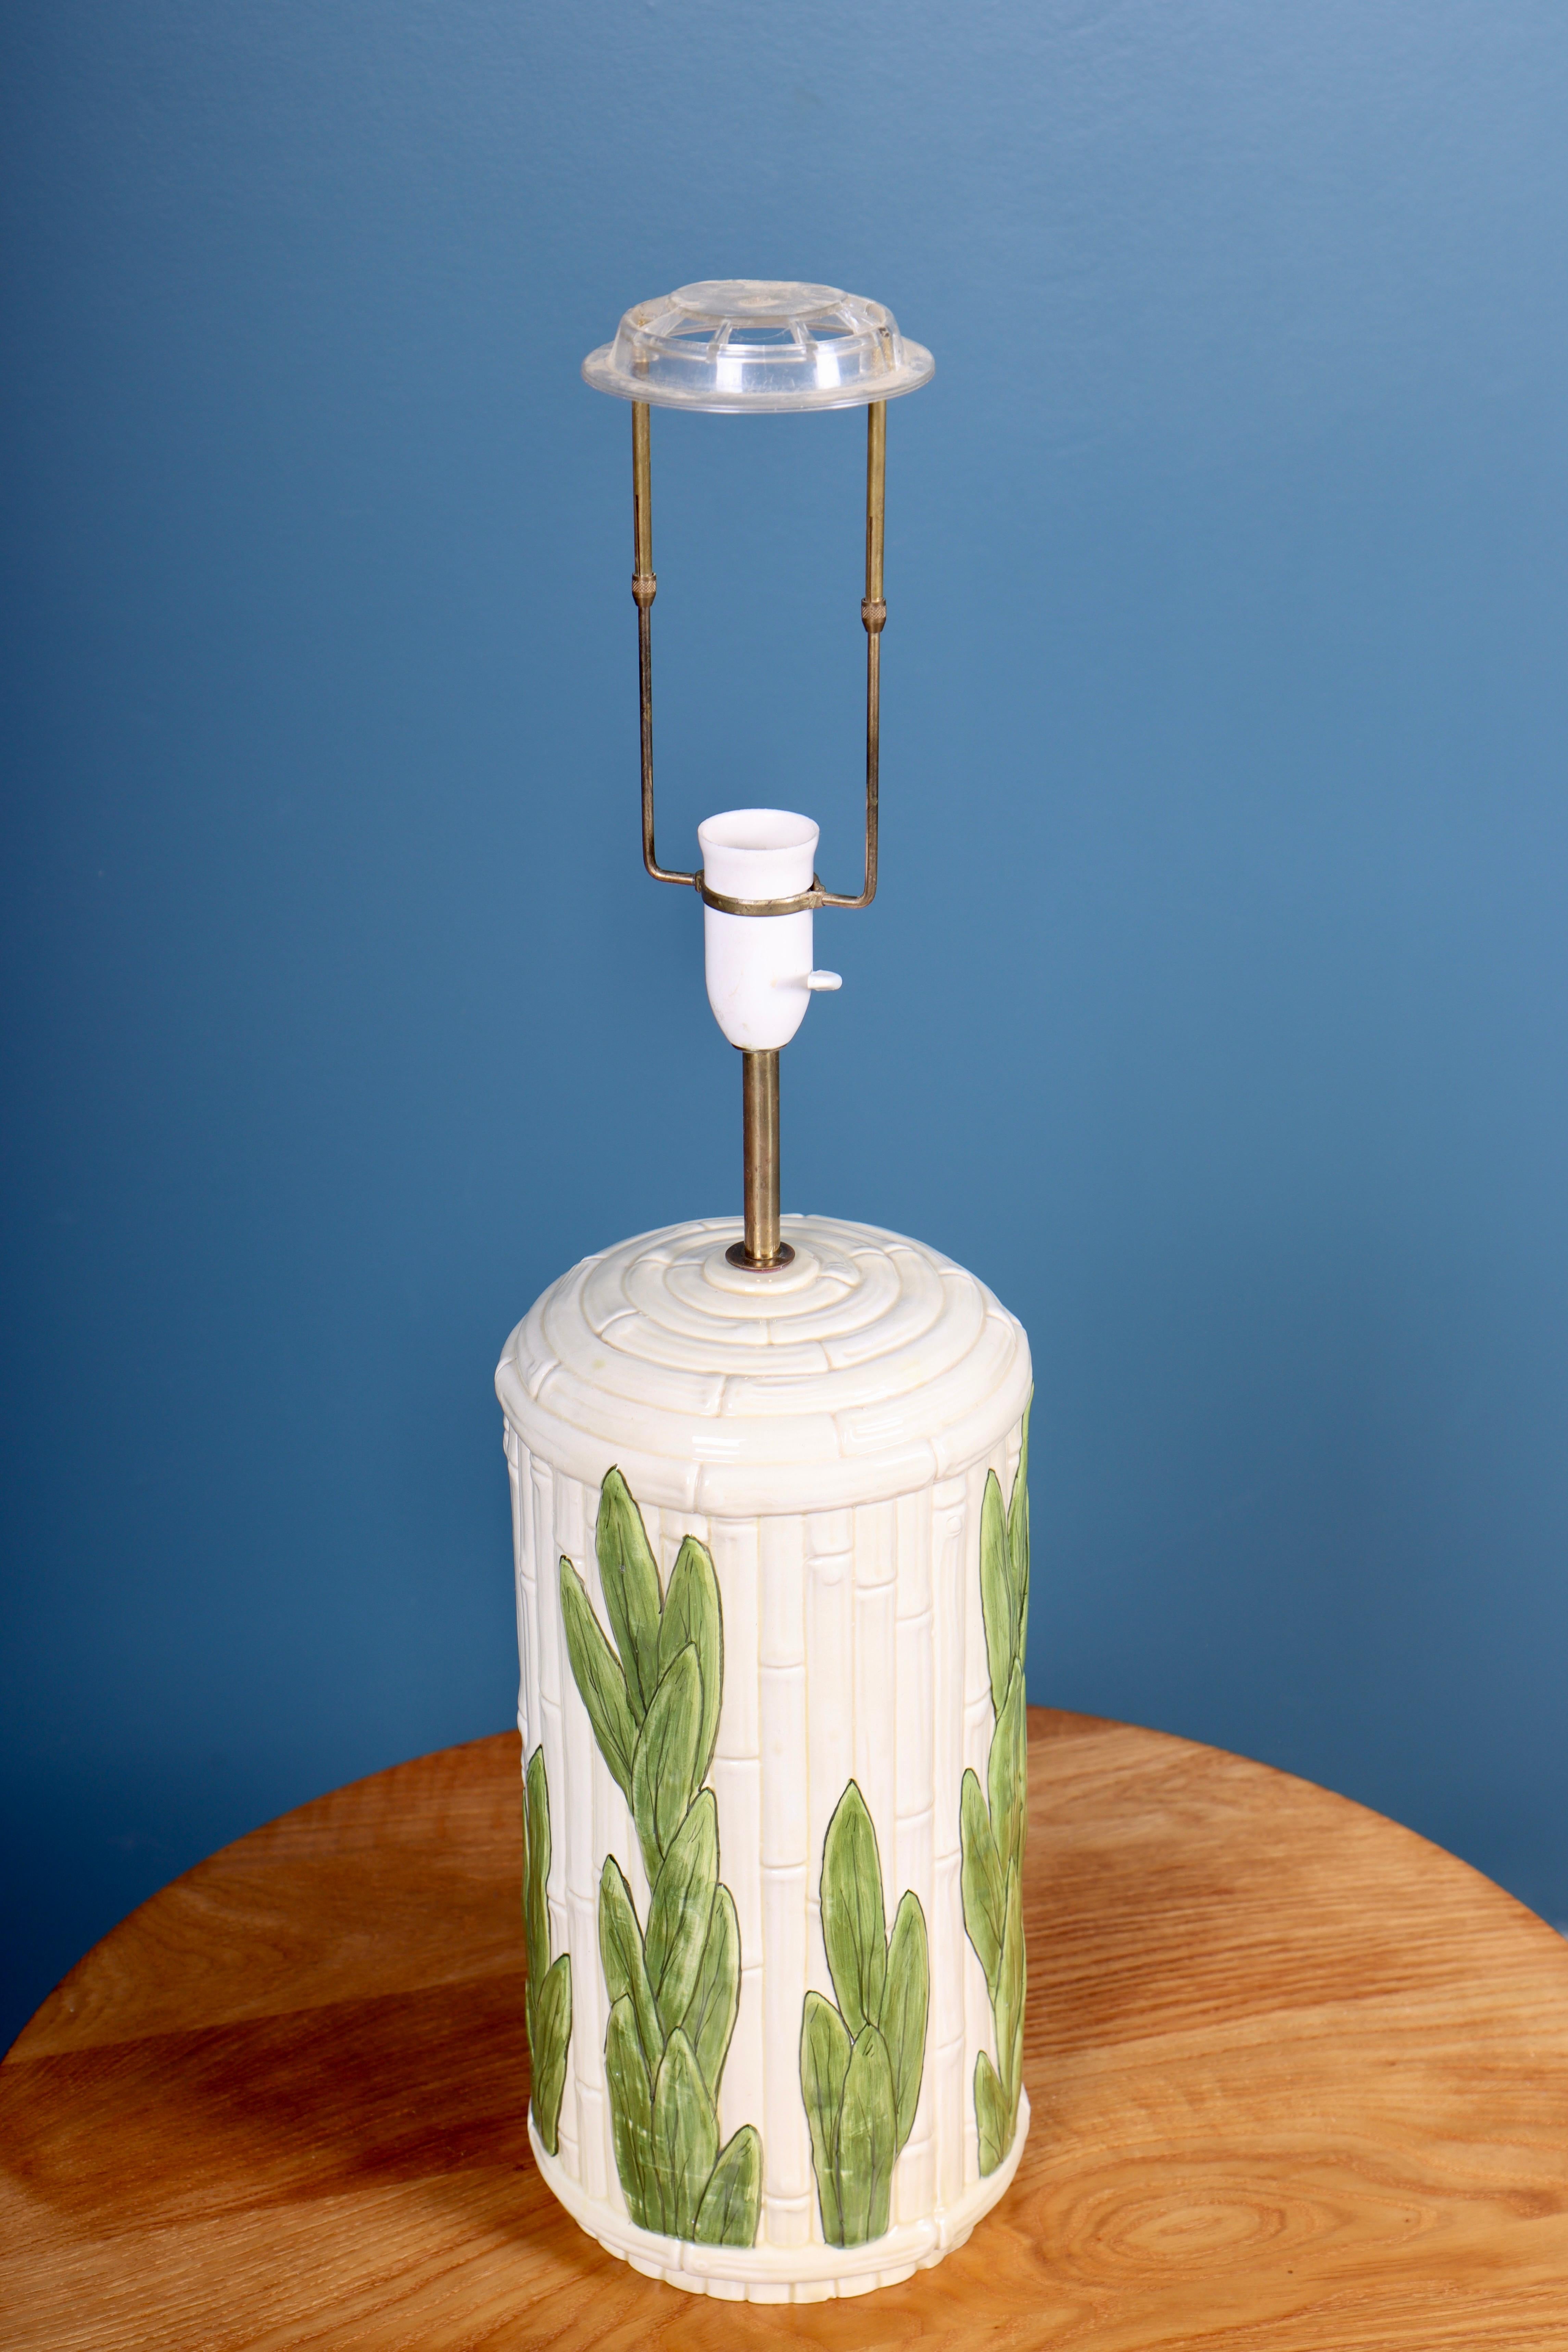 Italian Mid-Century Table Lamp in Ceramic by COSTA, 1960s For Sale